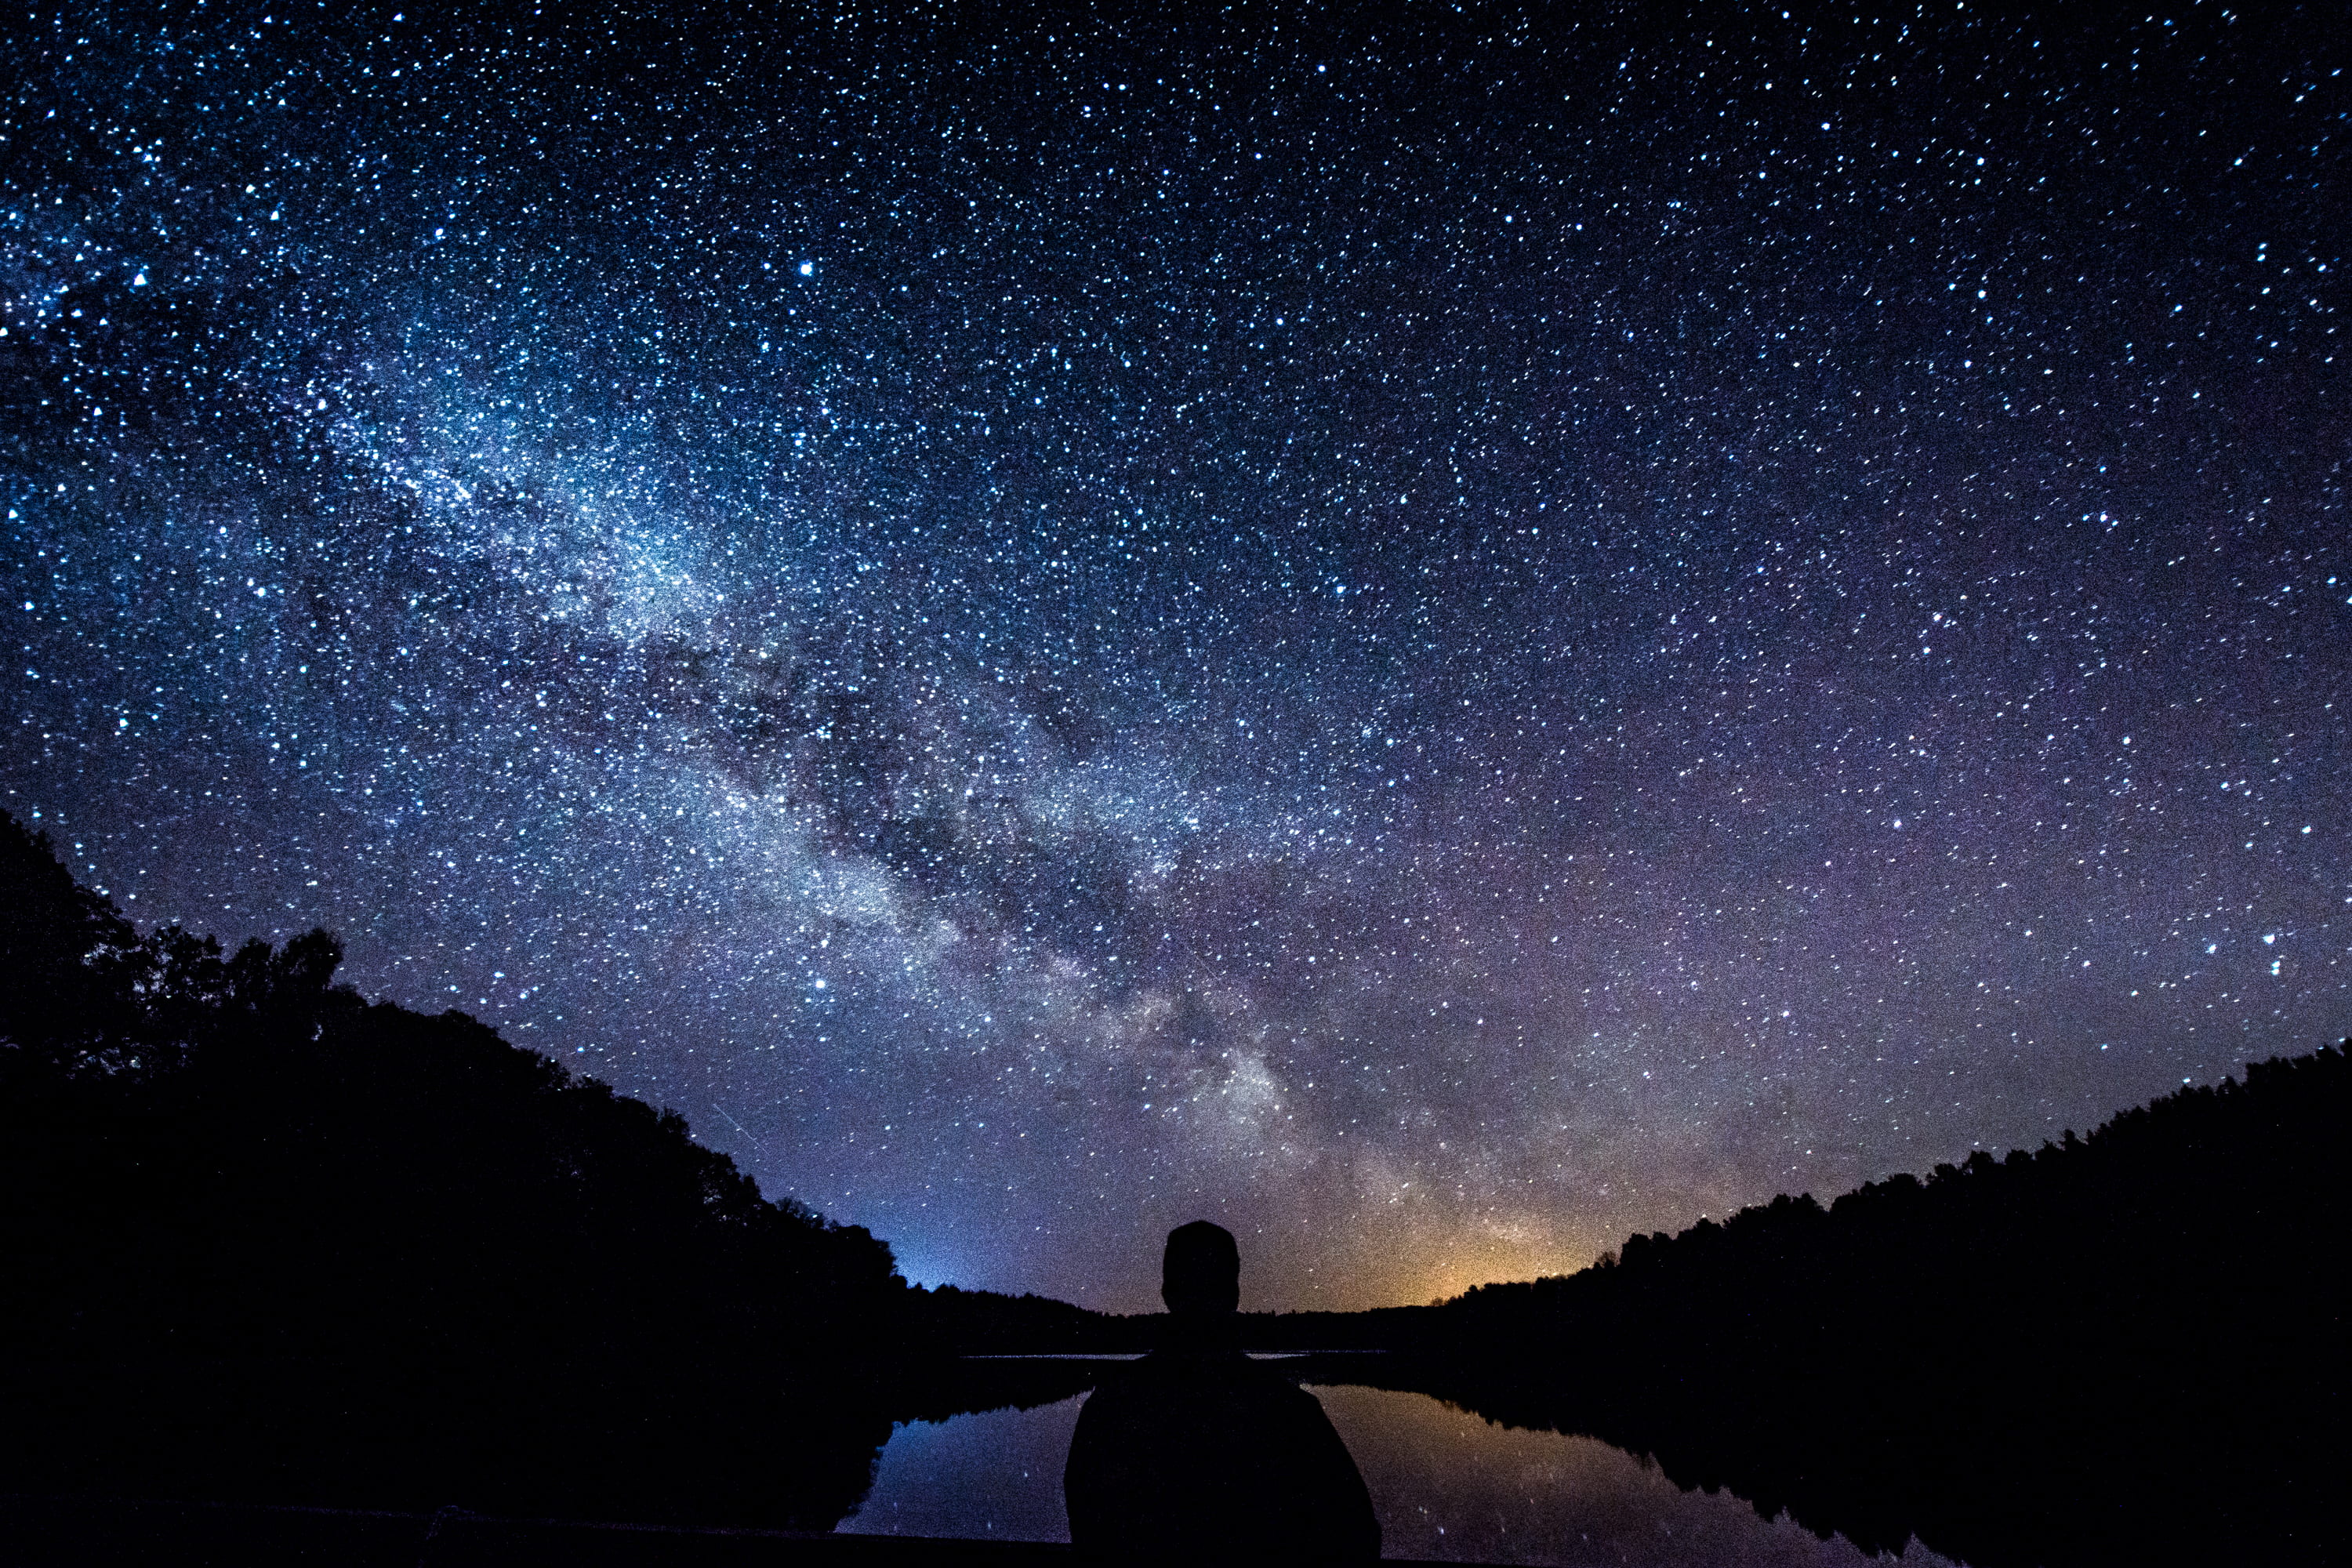 silhouette of person standing under starry sky, silhouette of person near body of water under starry night